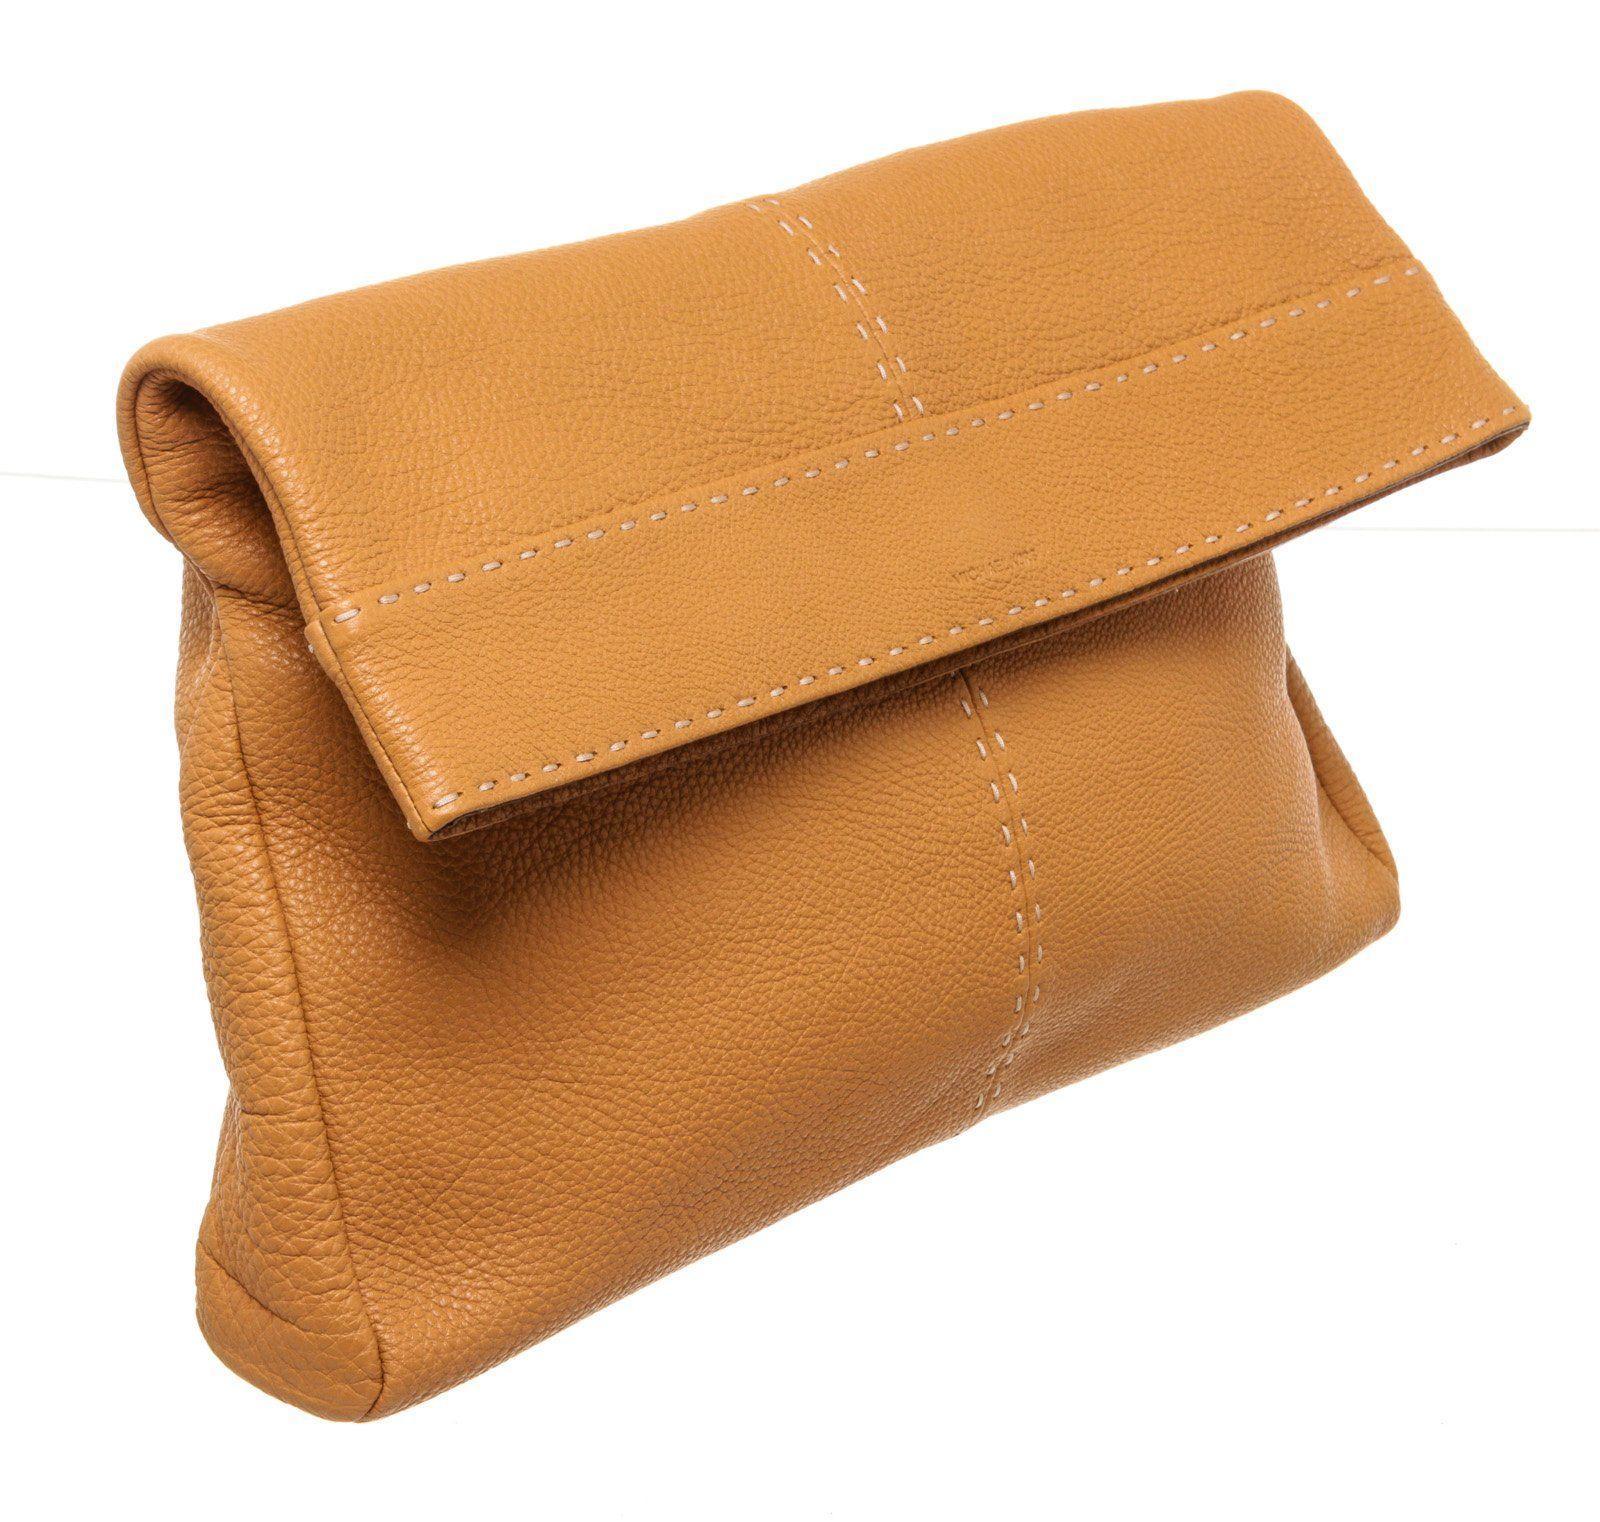 Orange leather Michael Kors Hutton clutch with gold-tone hardware, foldover top with magnetic closure, beige canvas lining, interior slip pockets and one zip pocket inside.


40748MSC